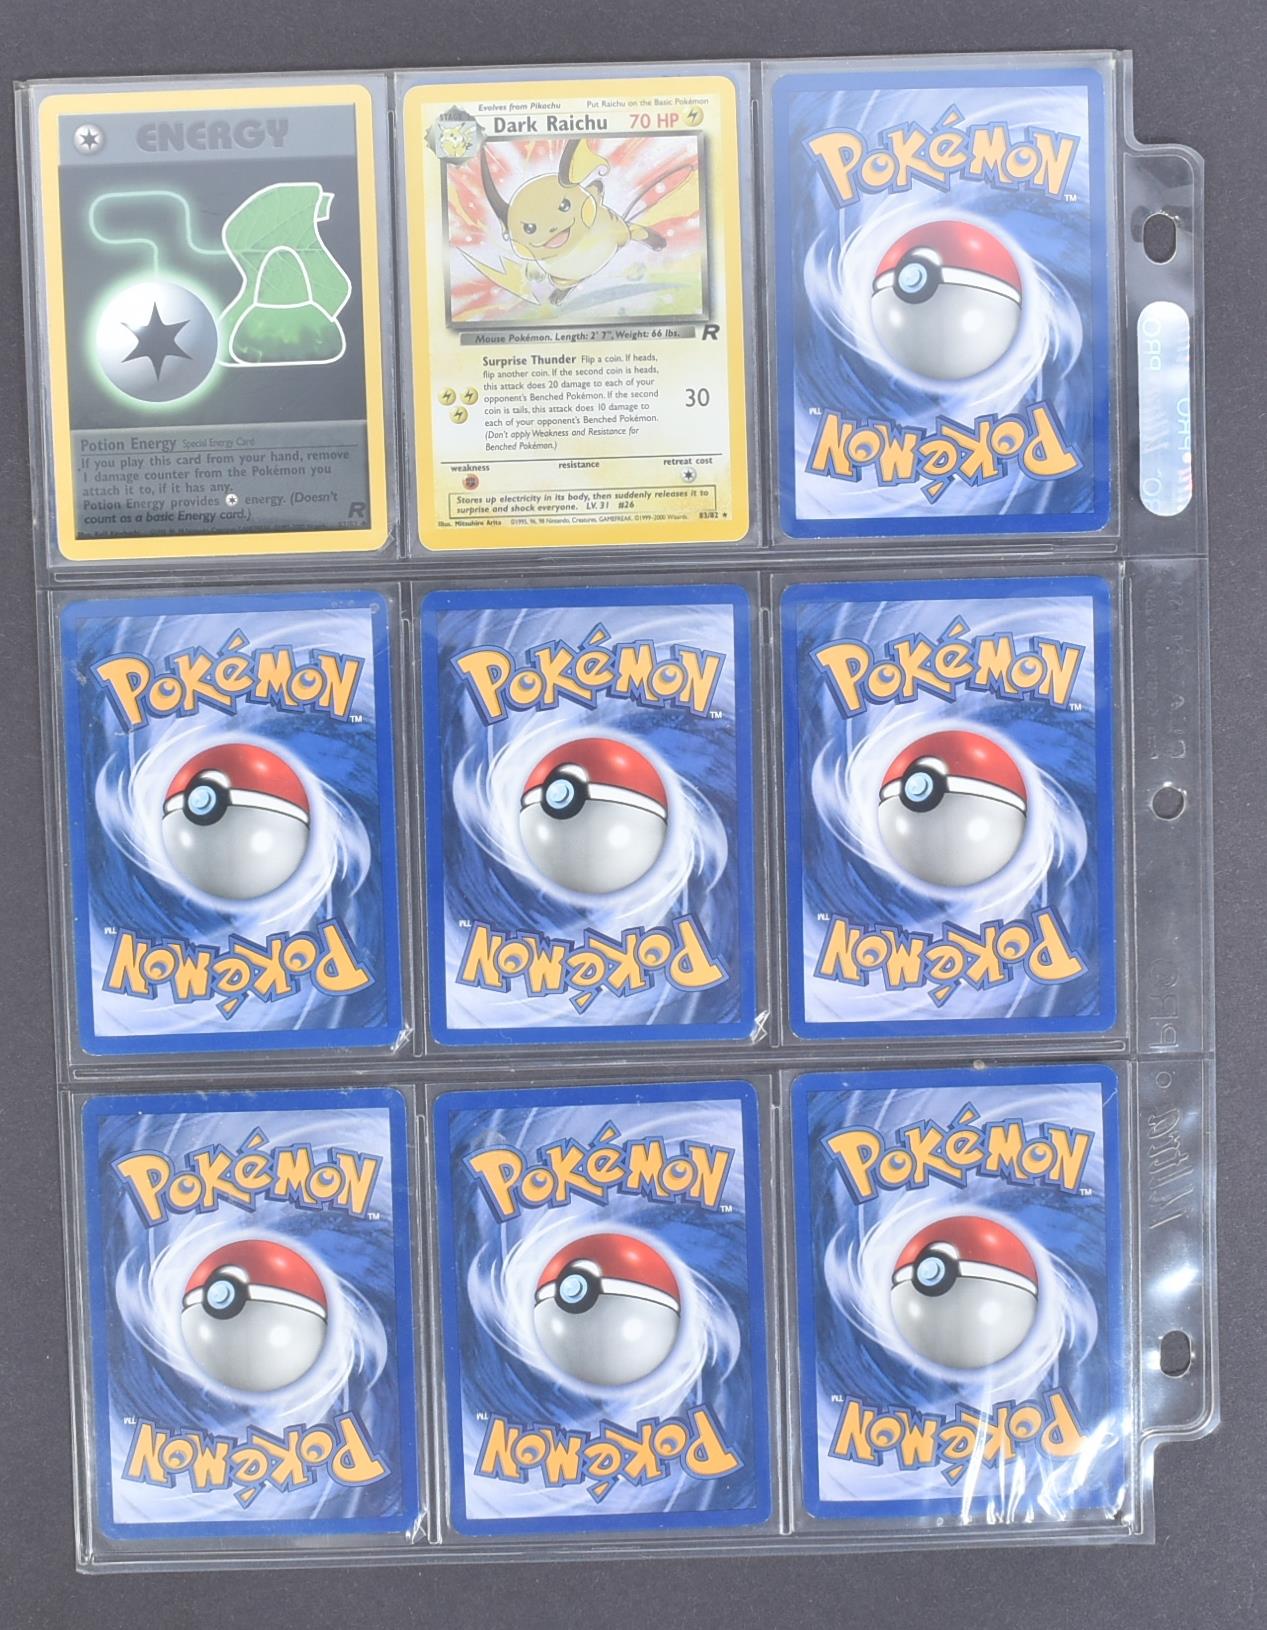 POKEMON TRADING CARD GAME - COMPLETE SET OF POKEMON WIZARDS OF THE COAST TEAM ROCKET SET - Image 14 of 14